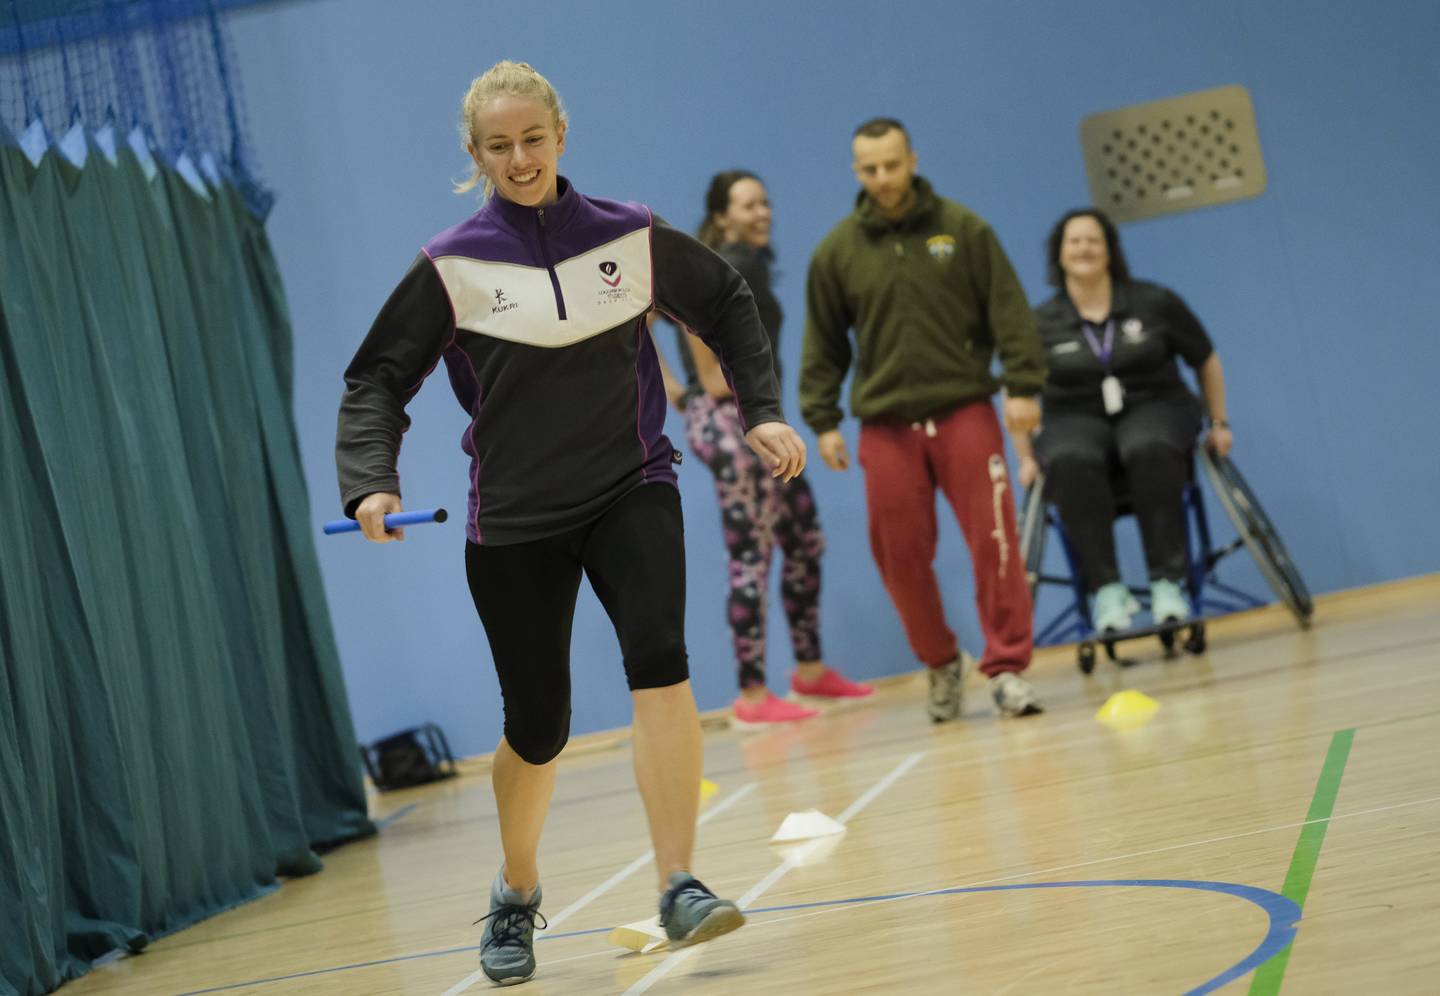 Loughborough students taking part in activities at inclusive activity programme workshop